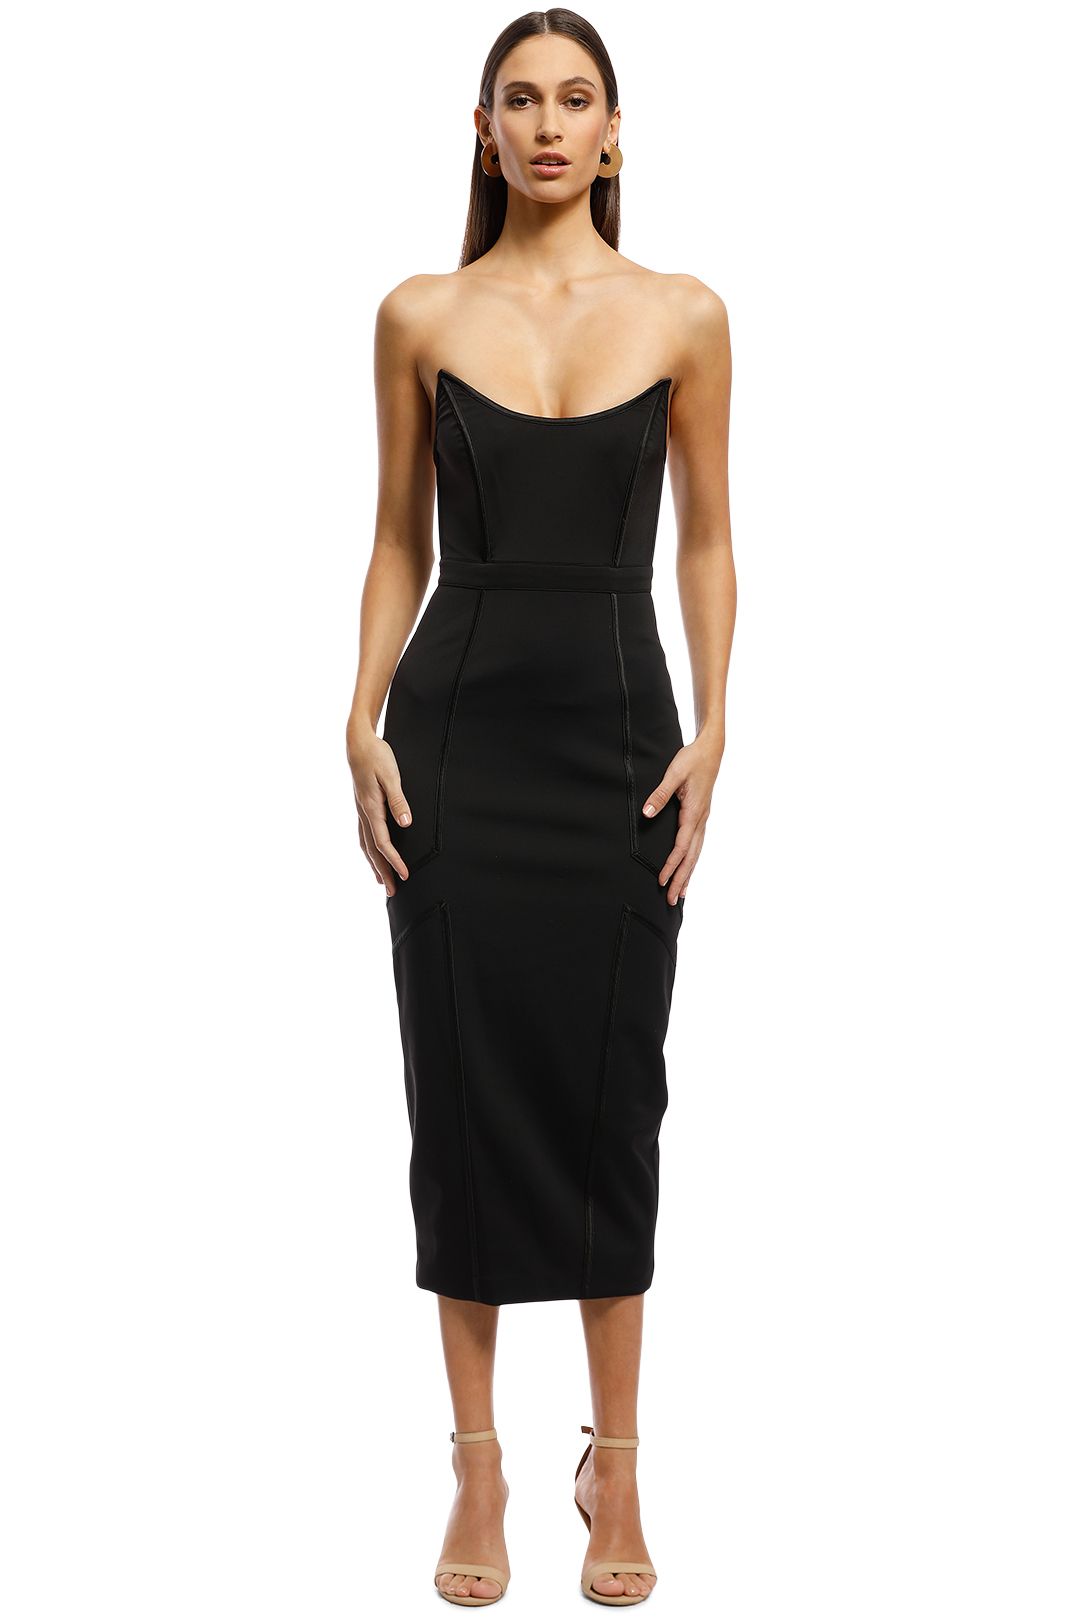 Lea Dress in Black by Misha Collection for Rent